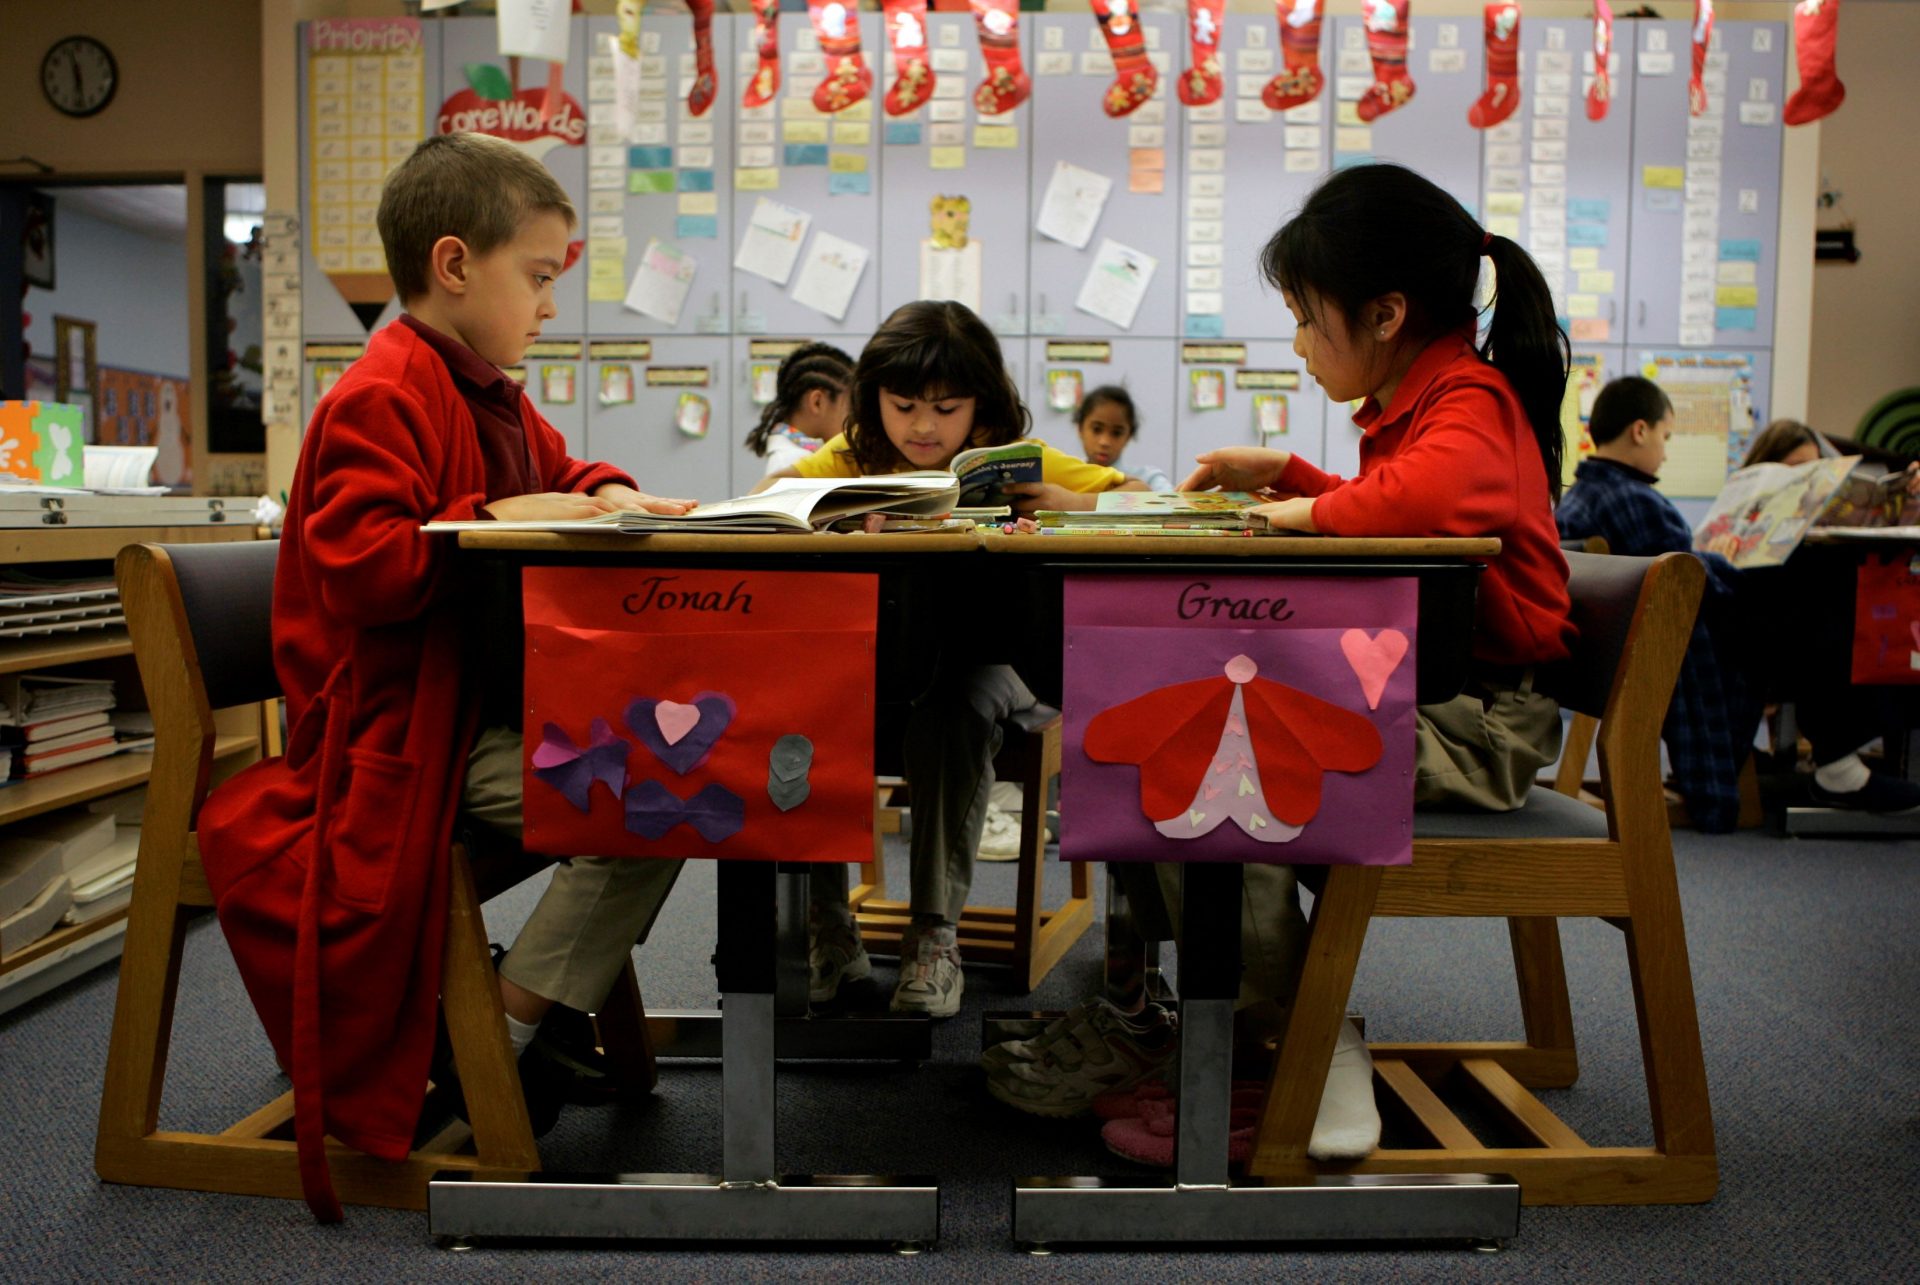 Elementary school students work on their reading during class quiet time at the Milton Hershey School in Hershey, Pa., Tuesday, Feb. 13, 2007. T